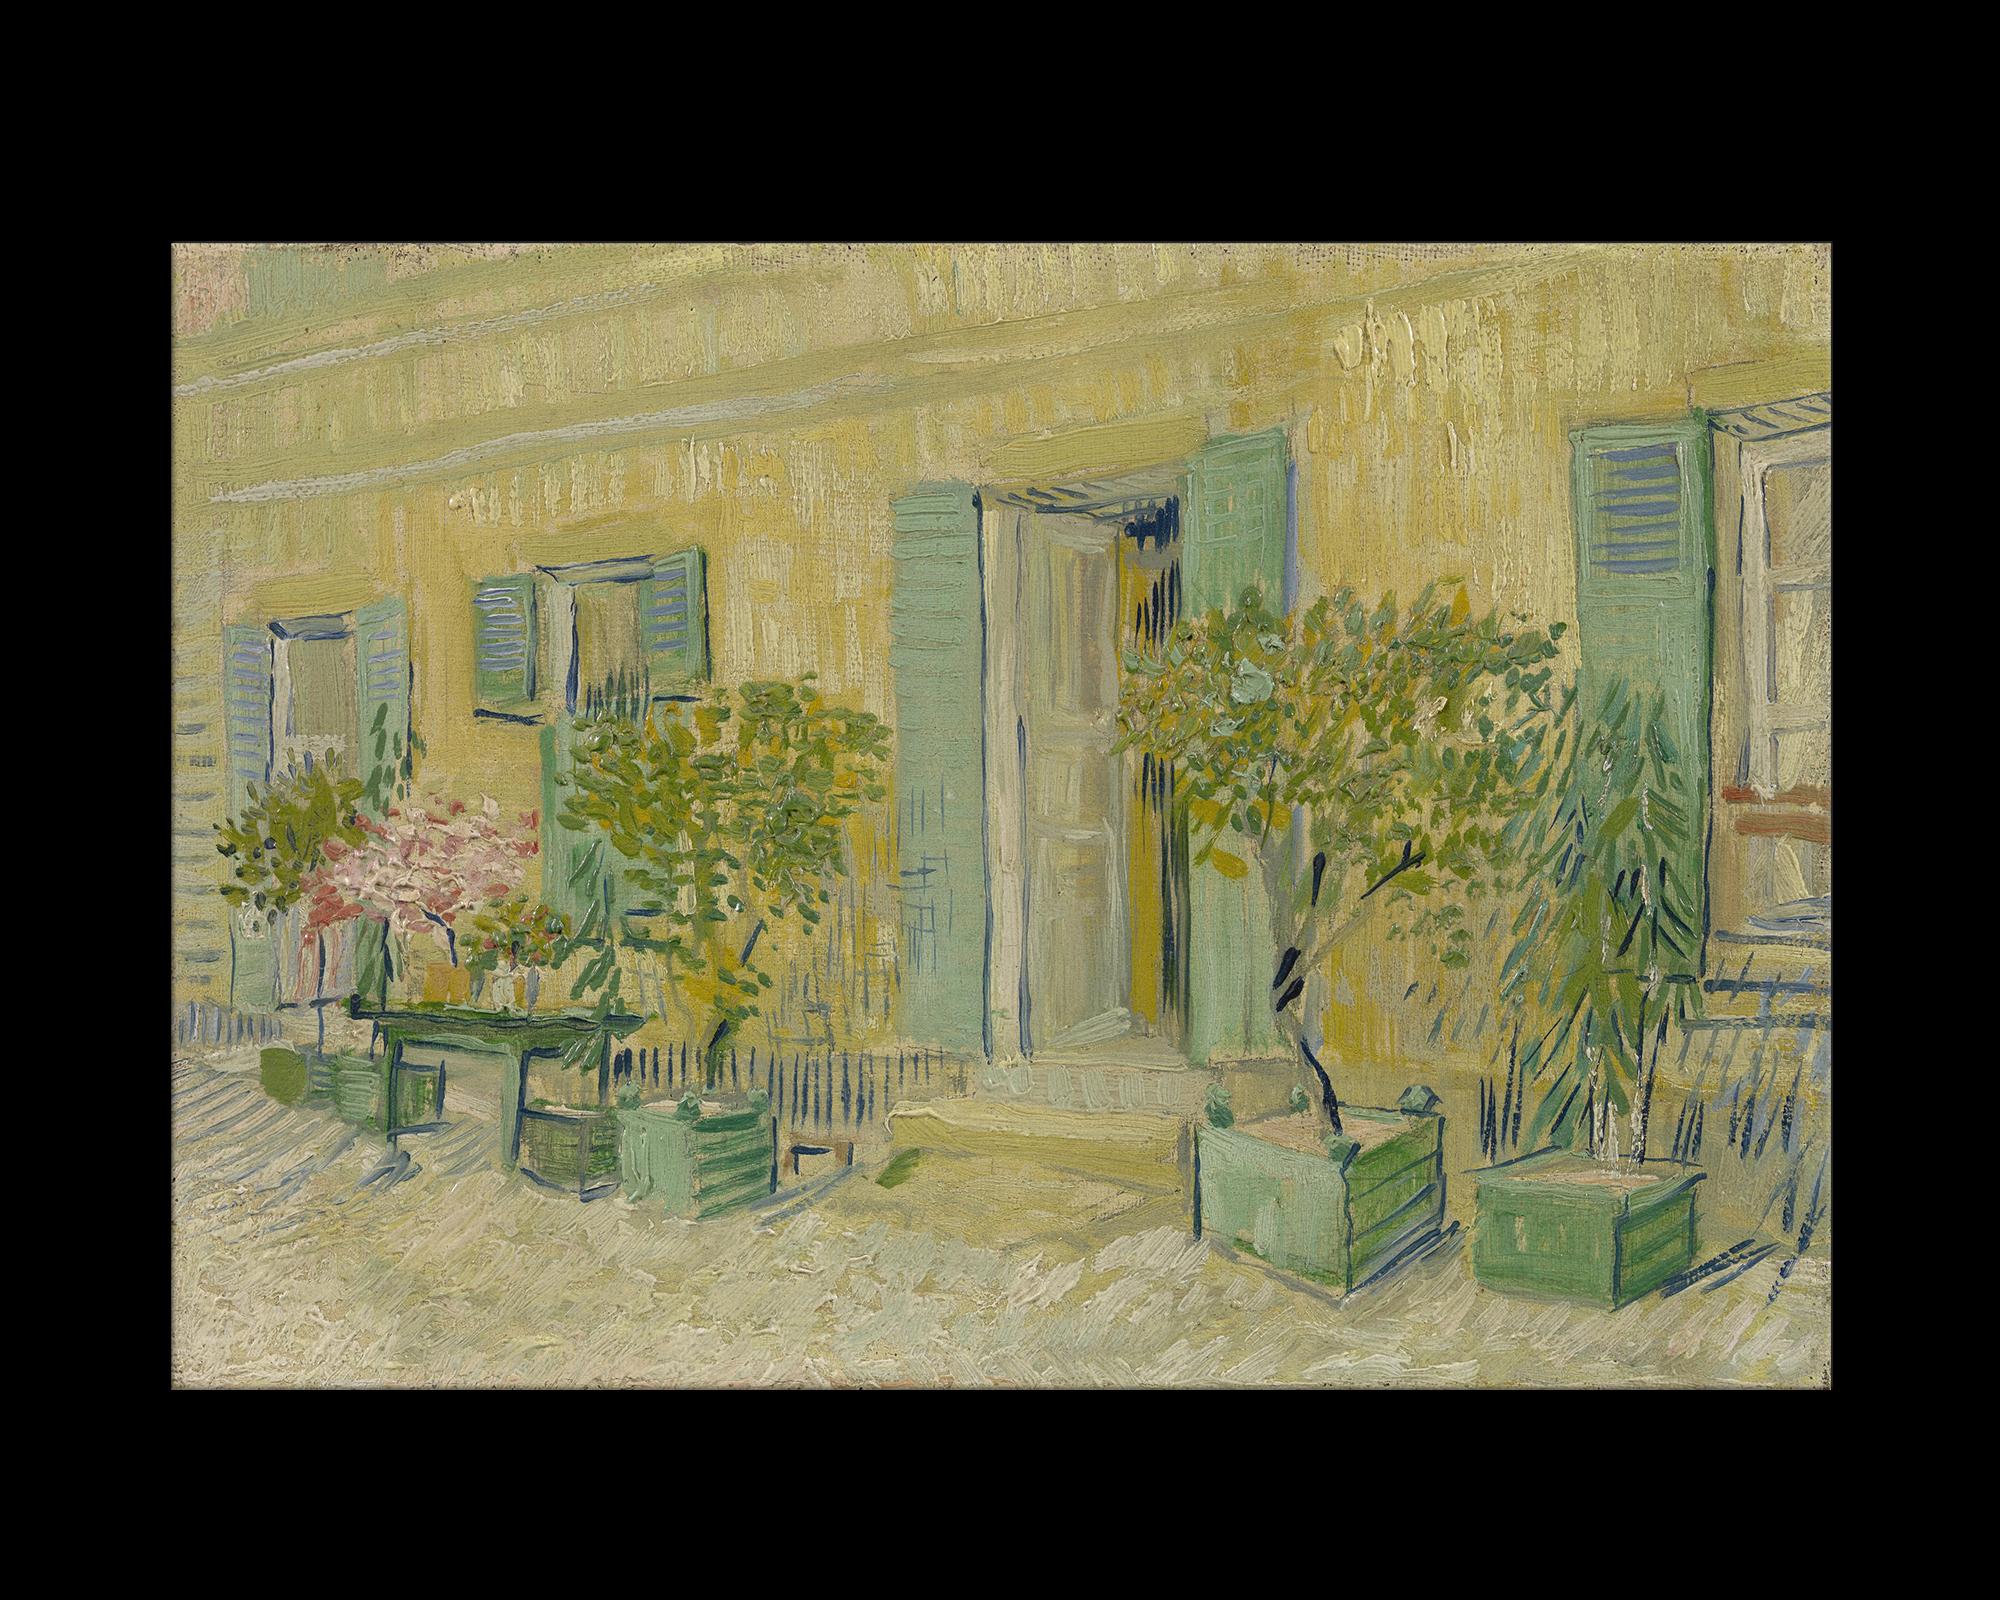 This large Impressionist Masterpiece is a faithful yet nuanced reproduction of the 